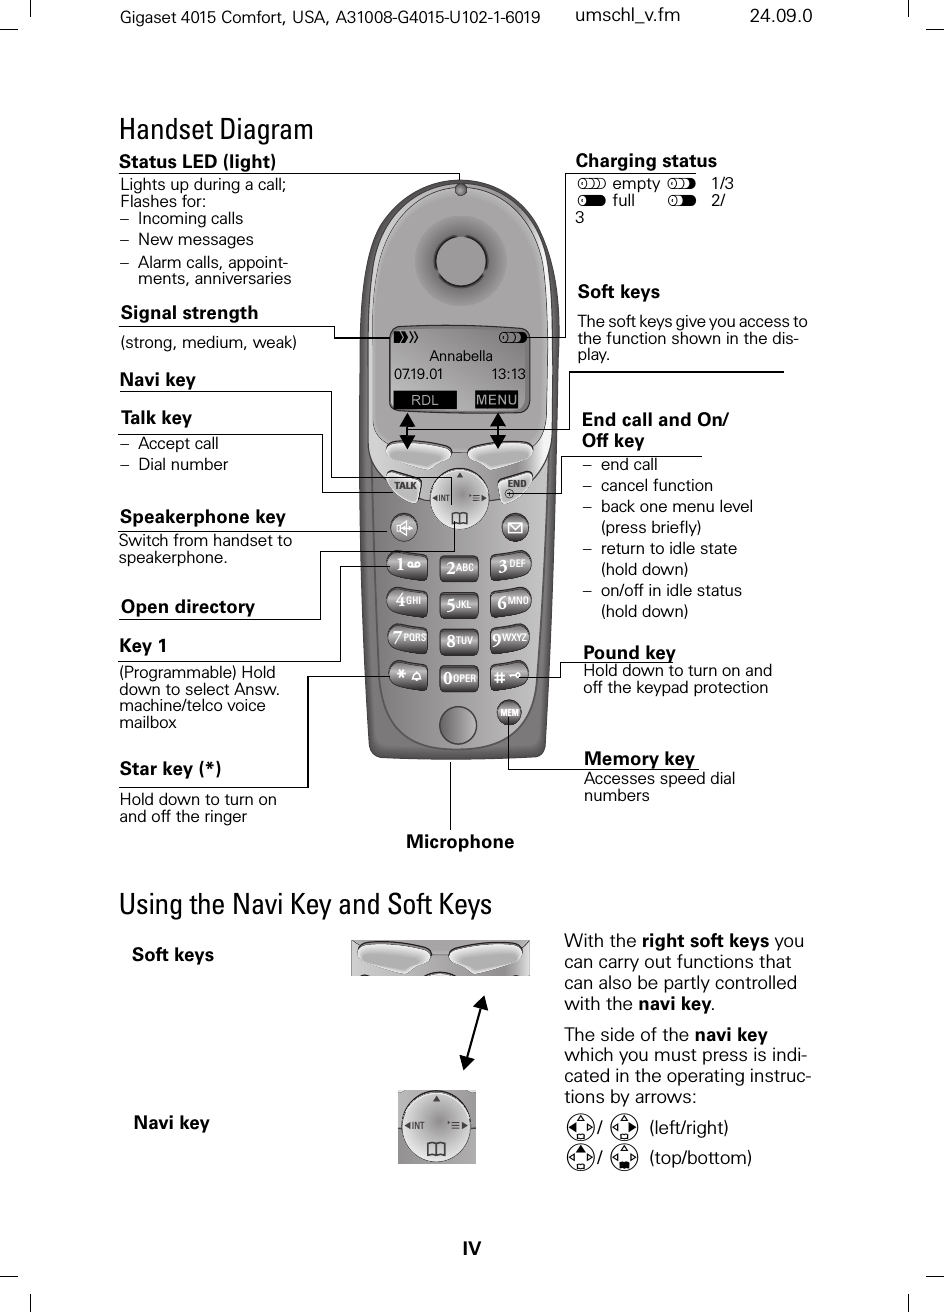 IVGigaset 4015 Comfort, USA, A31008-G4015-U102-1-6019 umschl_v.fm 24.09.0Handset DiagramUsing the Navi Key and Soft Keys123ABC DEFINT456JKL MNOGHI789TUV WXYZPQRS00TALKOPERMEMENDOpen directoryEnd call and On/Off keyTalk keyMemory keyAccesses speed dial numbers–end call–cancel function–back one menu level (press briefly)–return to idle state(hold down)–on/off in idle status (hold down)Speakerphone keyS&quot;Annabella07.19.01 13:1300(18–Accept call–Dial numberStar key (*)Hold down to turn on and off the ringerCharging statusempty &quot;1/3full       2/3Signal strength(strong, medium, weak)Navi keyStatus LED (light)Soft keysThe soft keys give you access to the function shown in the dis-play.Lights up during a call;Flashes for:–Incoming calls–New messages–Alarm calls, appoint-ments, anniversariesKey 1(Programmable) Hold down to select Answ. machine/telco voice mailbox MicrophonePound keyHold down to turn on and off the keypad protectionINTWith the right soft keys you can carry out functions that can also be partly controlled with the navi key.The side of the navi key which you must press is indi-cated in the operating instruc-tions by arrows:/ (left/right)/ (top/bottom)Navi keySoft keysSwitch from handset to speakerphone.